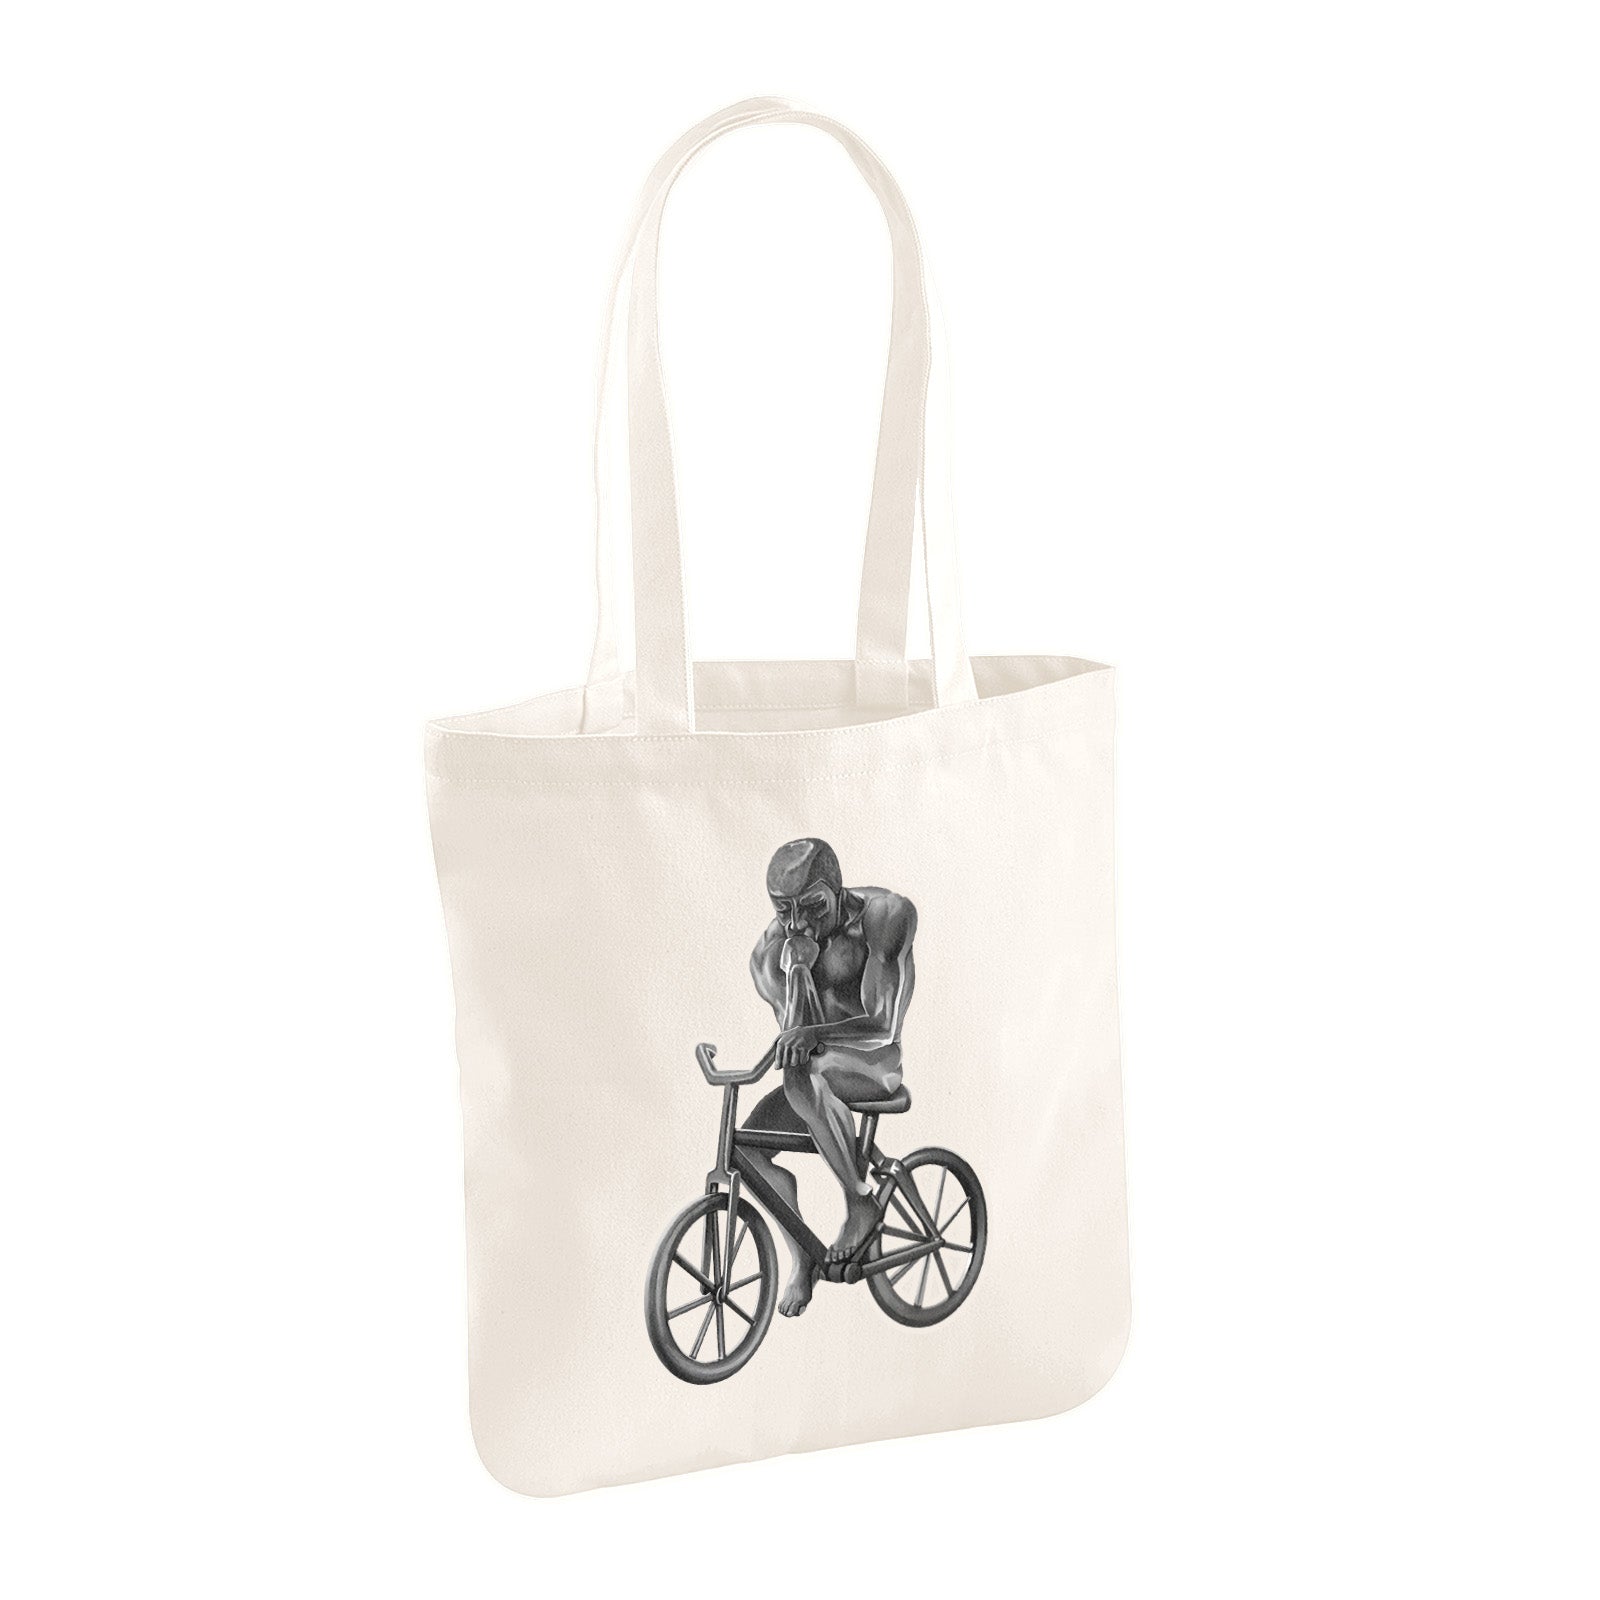 The Thinker Riding Bicycle 100% Organic Cotton Tote